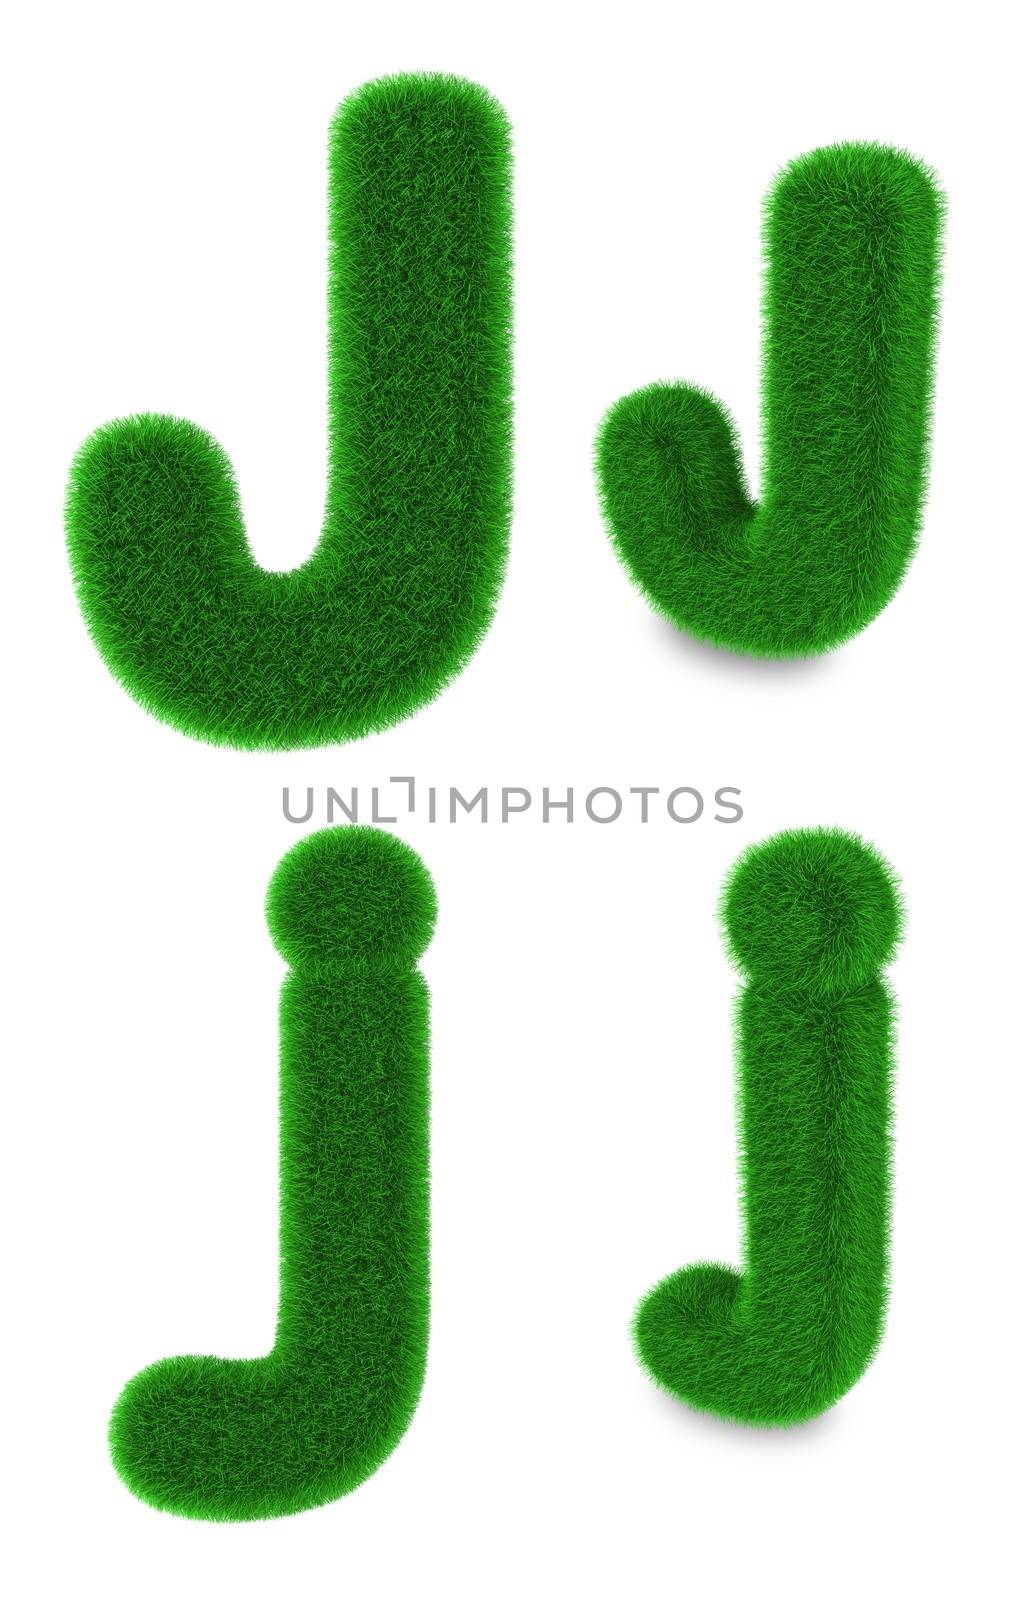 Letter J made of grass by Harvepino